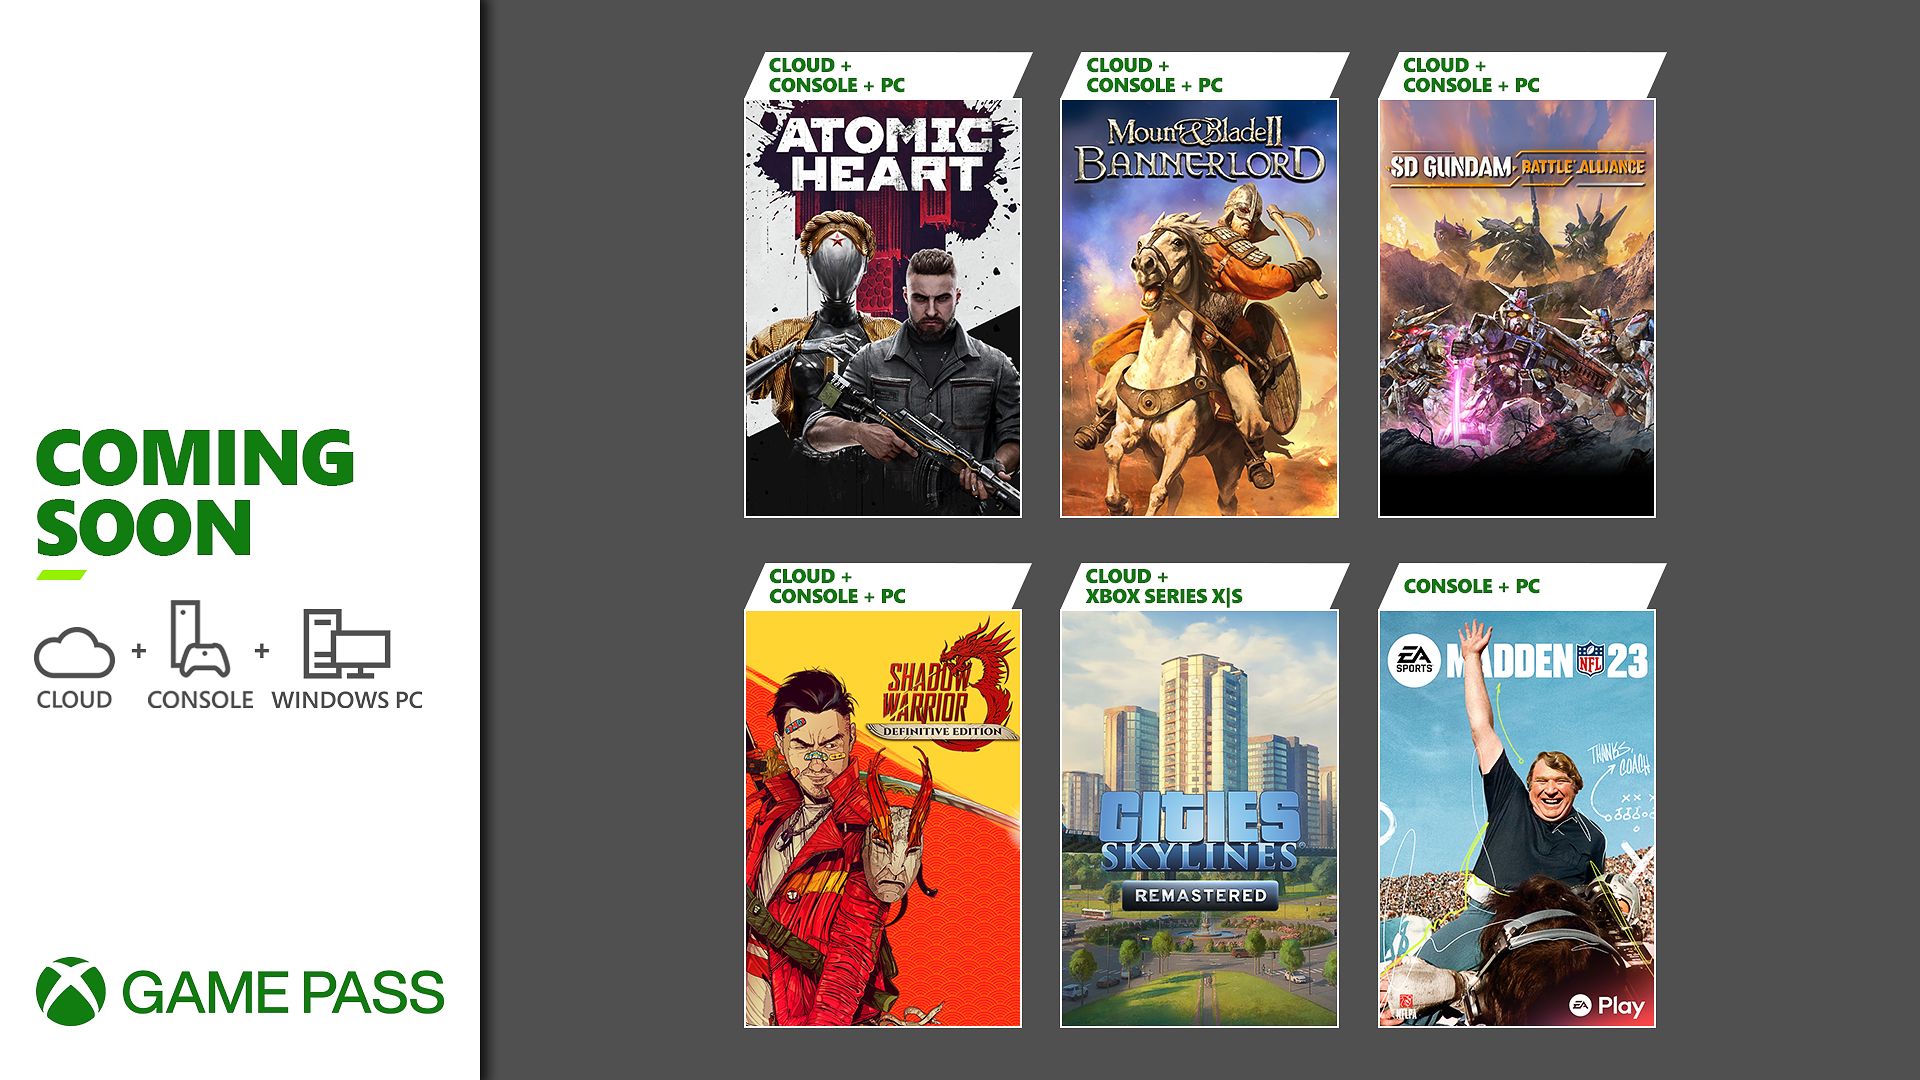 Image for Cities: Skylines and Atomic Heart join Xbox Game Pass in February